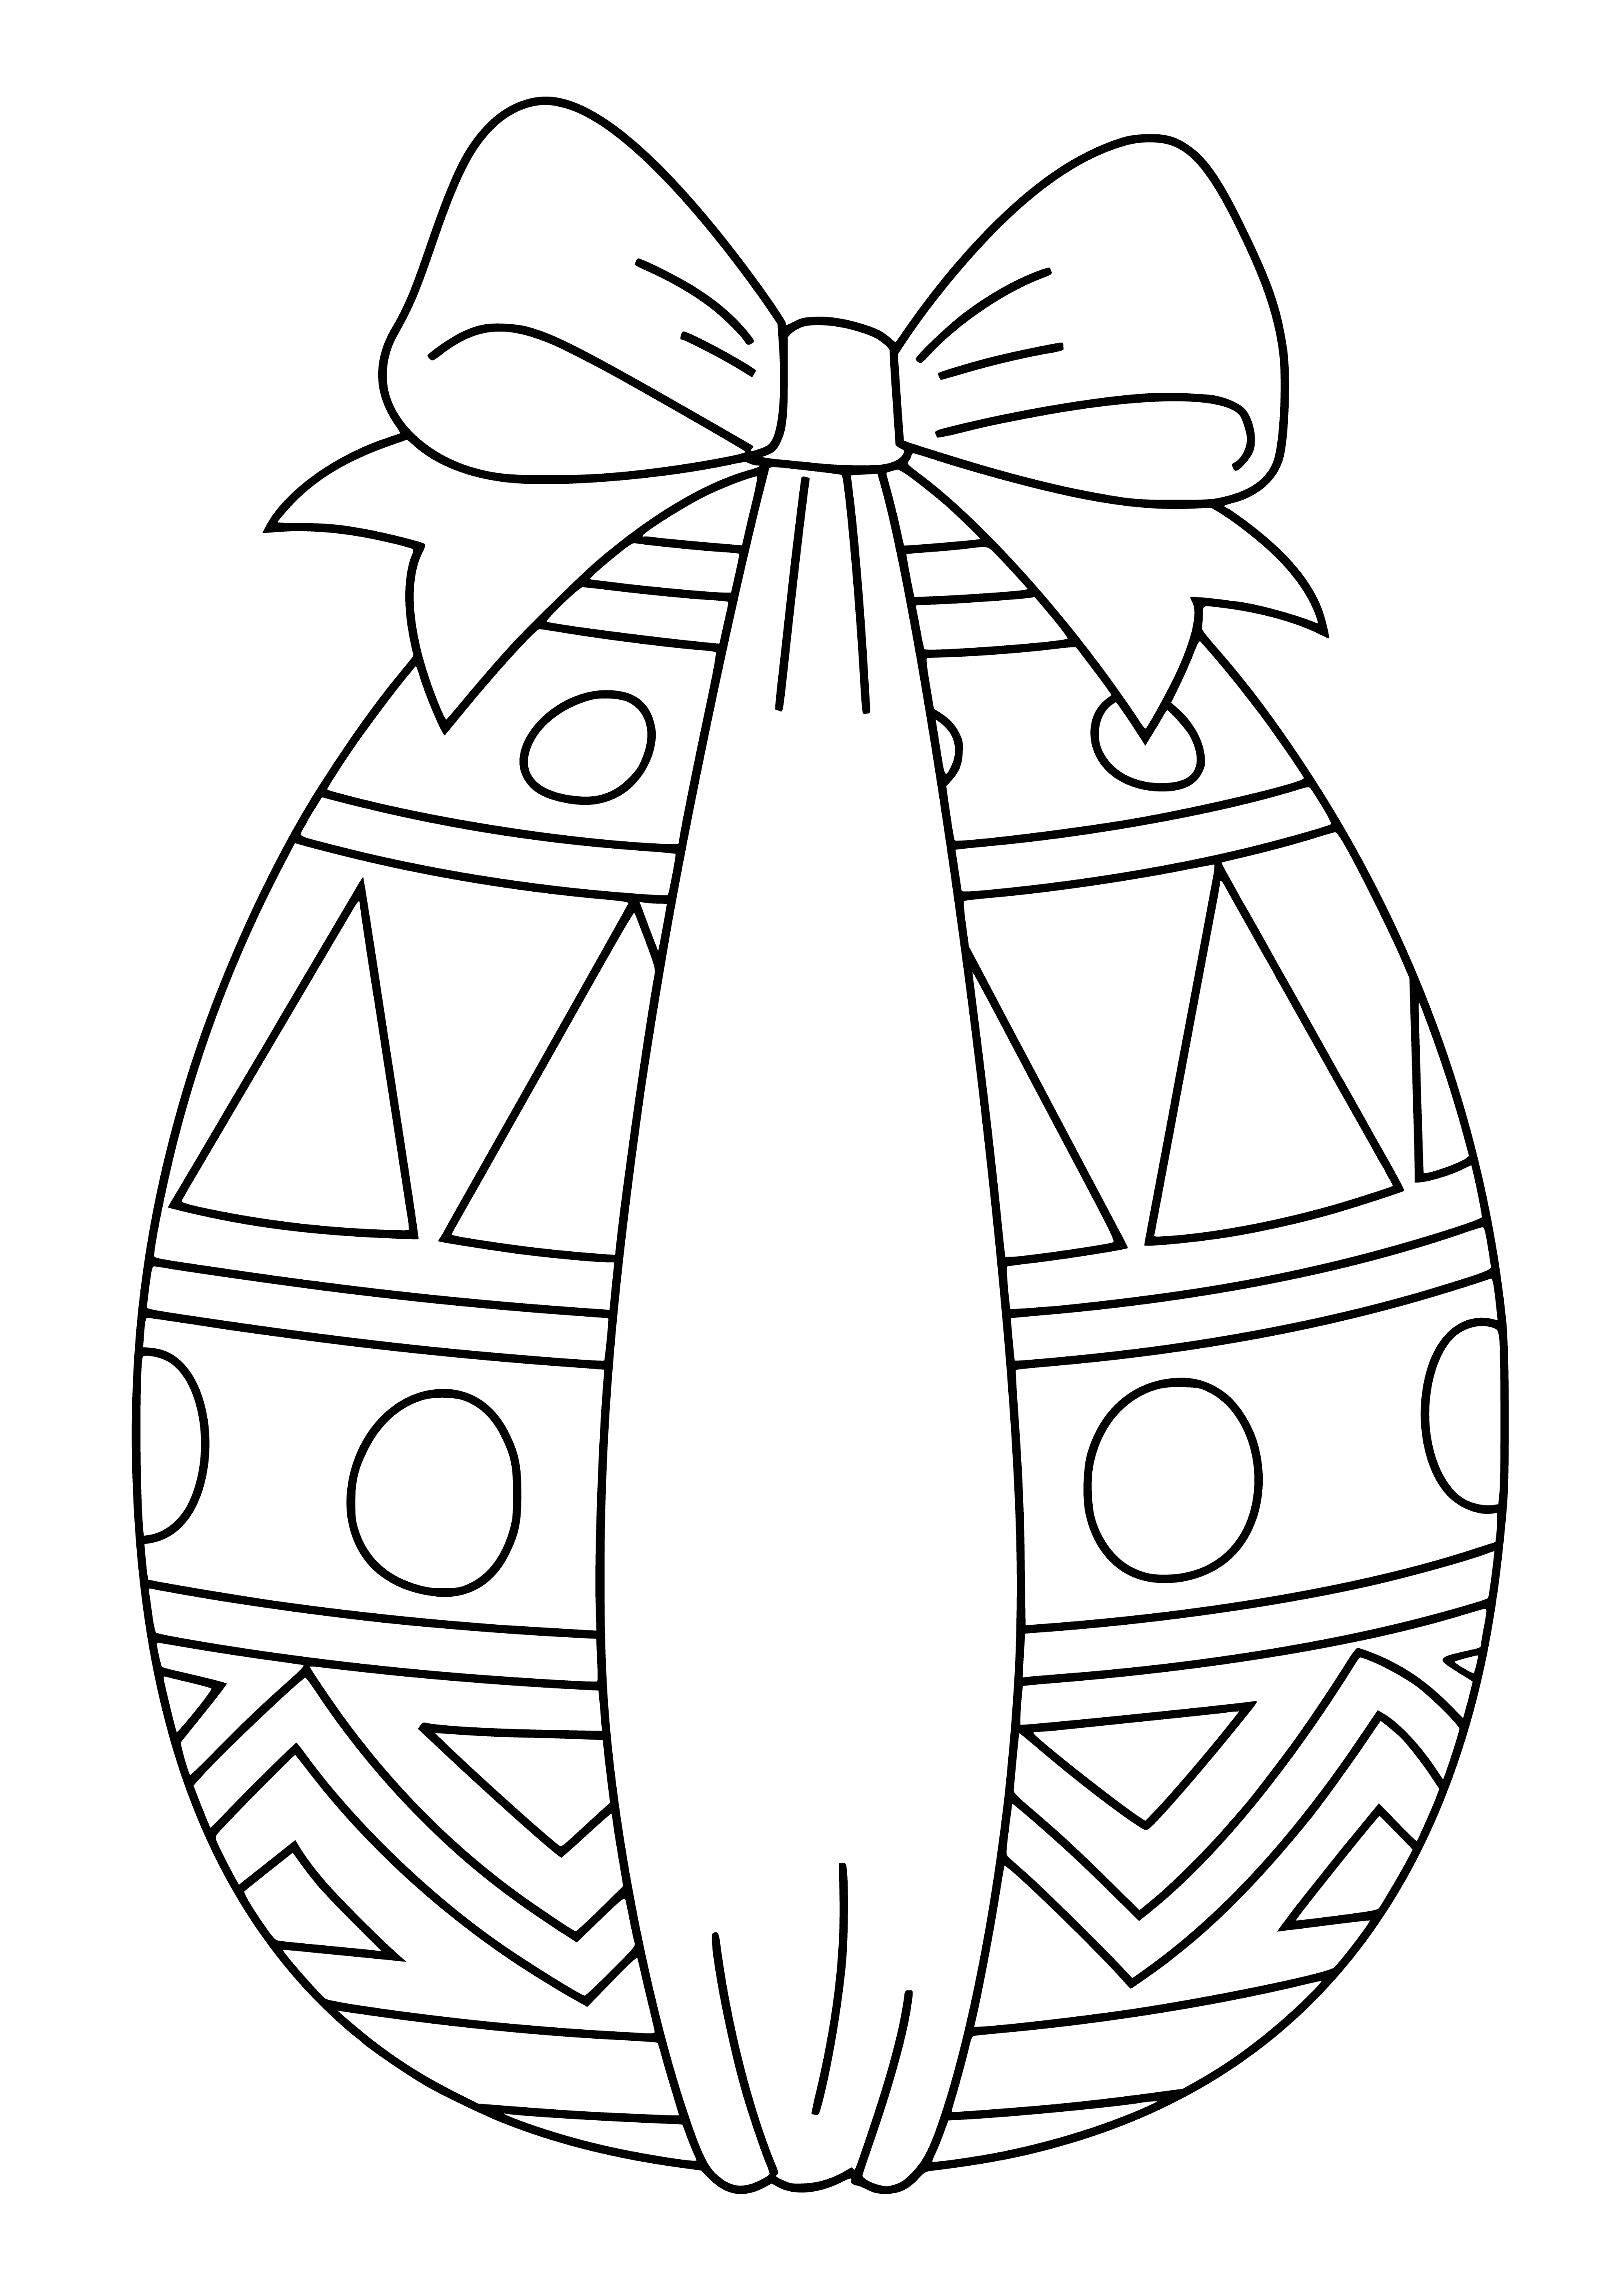 coloring page: Decoration symbolizing the joy and celebration of this Christian holiday.
Easter egg with bow: Decor symbolizing joy & celebration of Christian holiday.